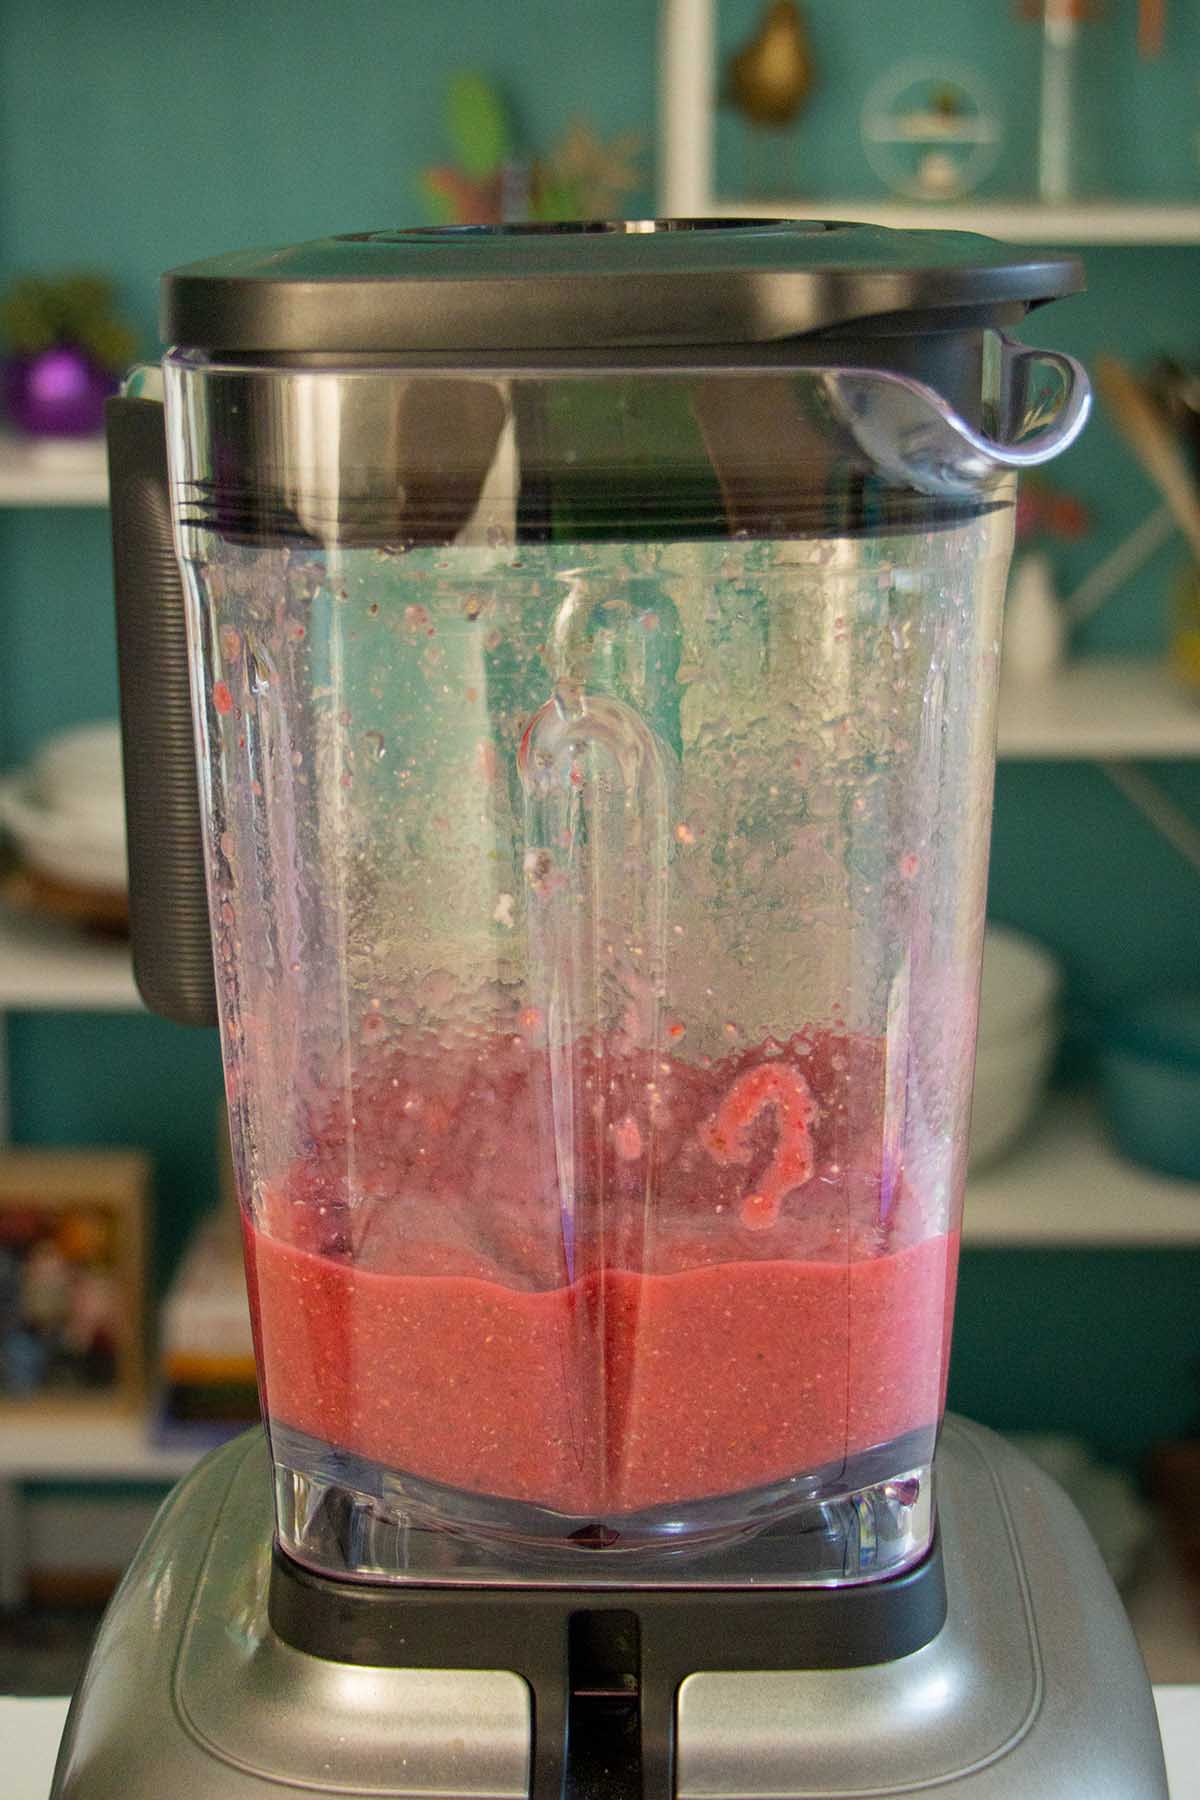 banana and raspberry smoothie in the blender after blending